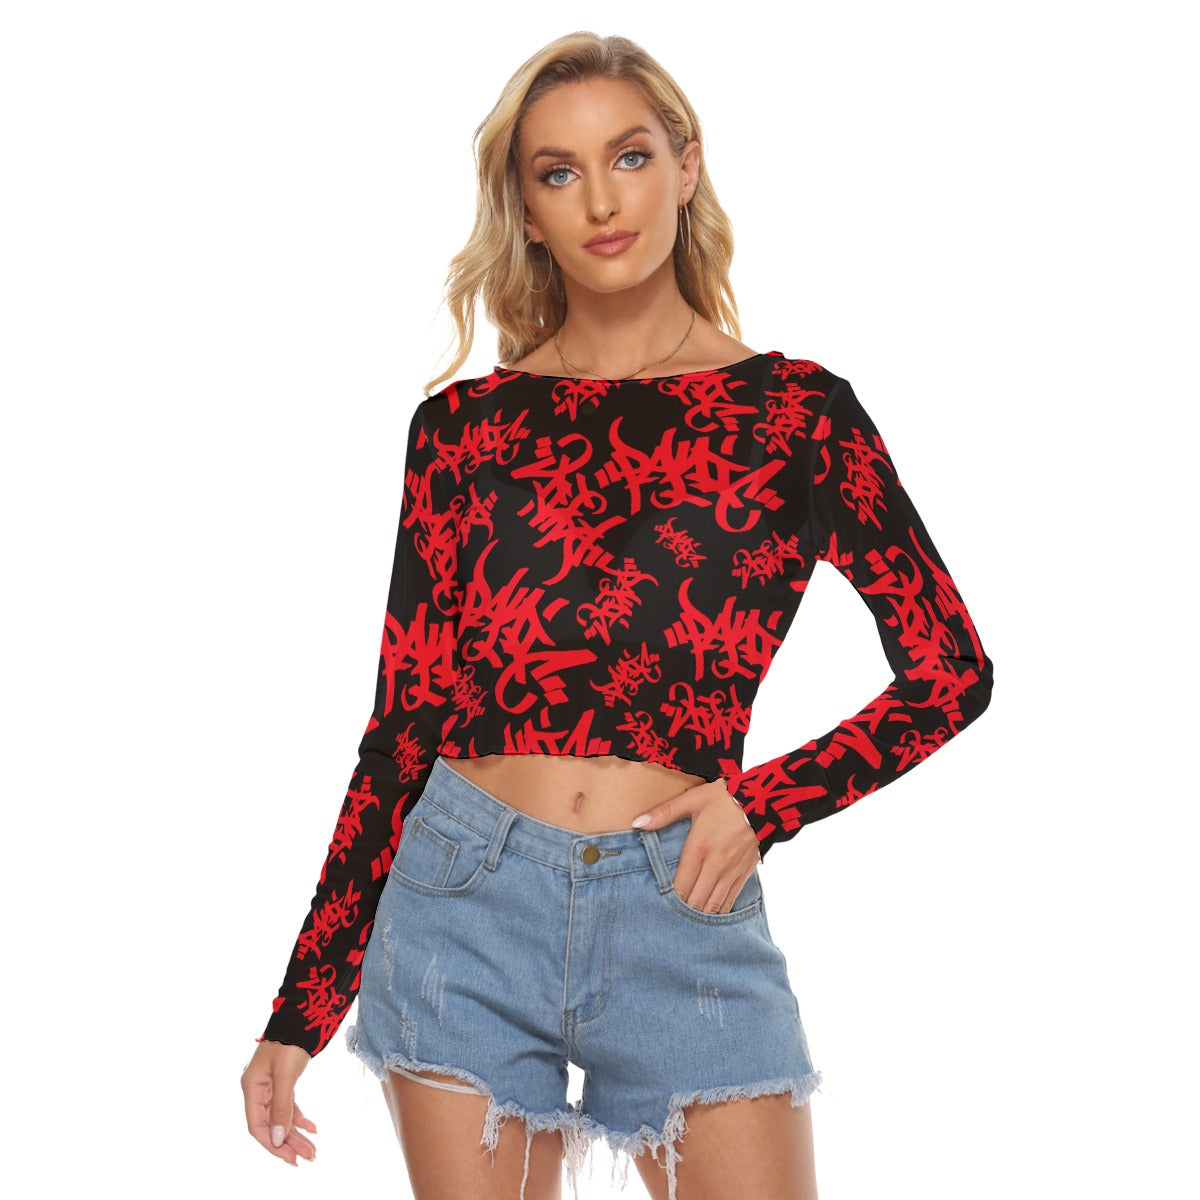 THE TAG MESH WOMENS CROP LONG SLEEVE TOP BLACK/RED - Panic 39